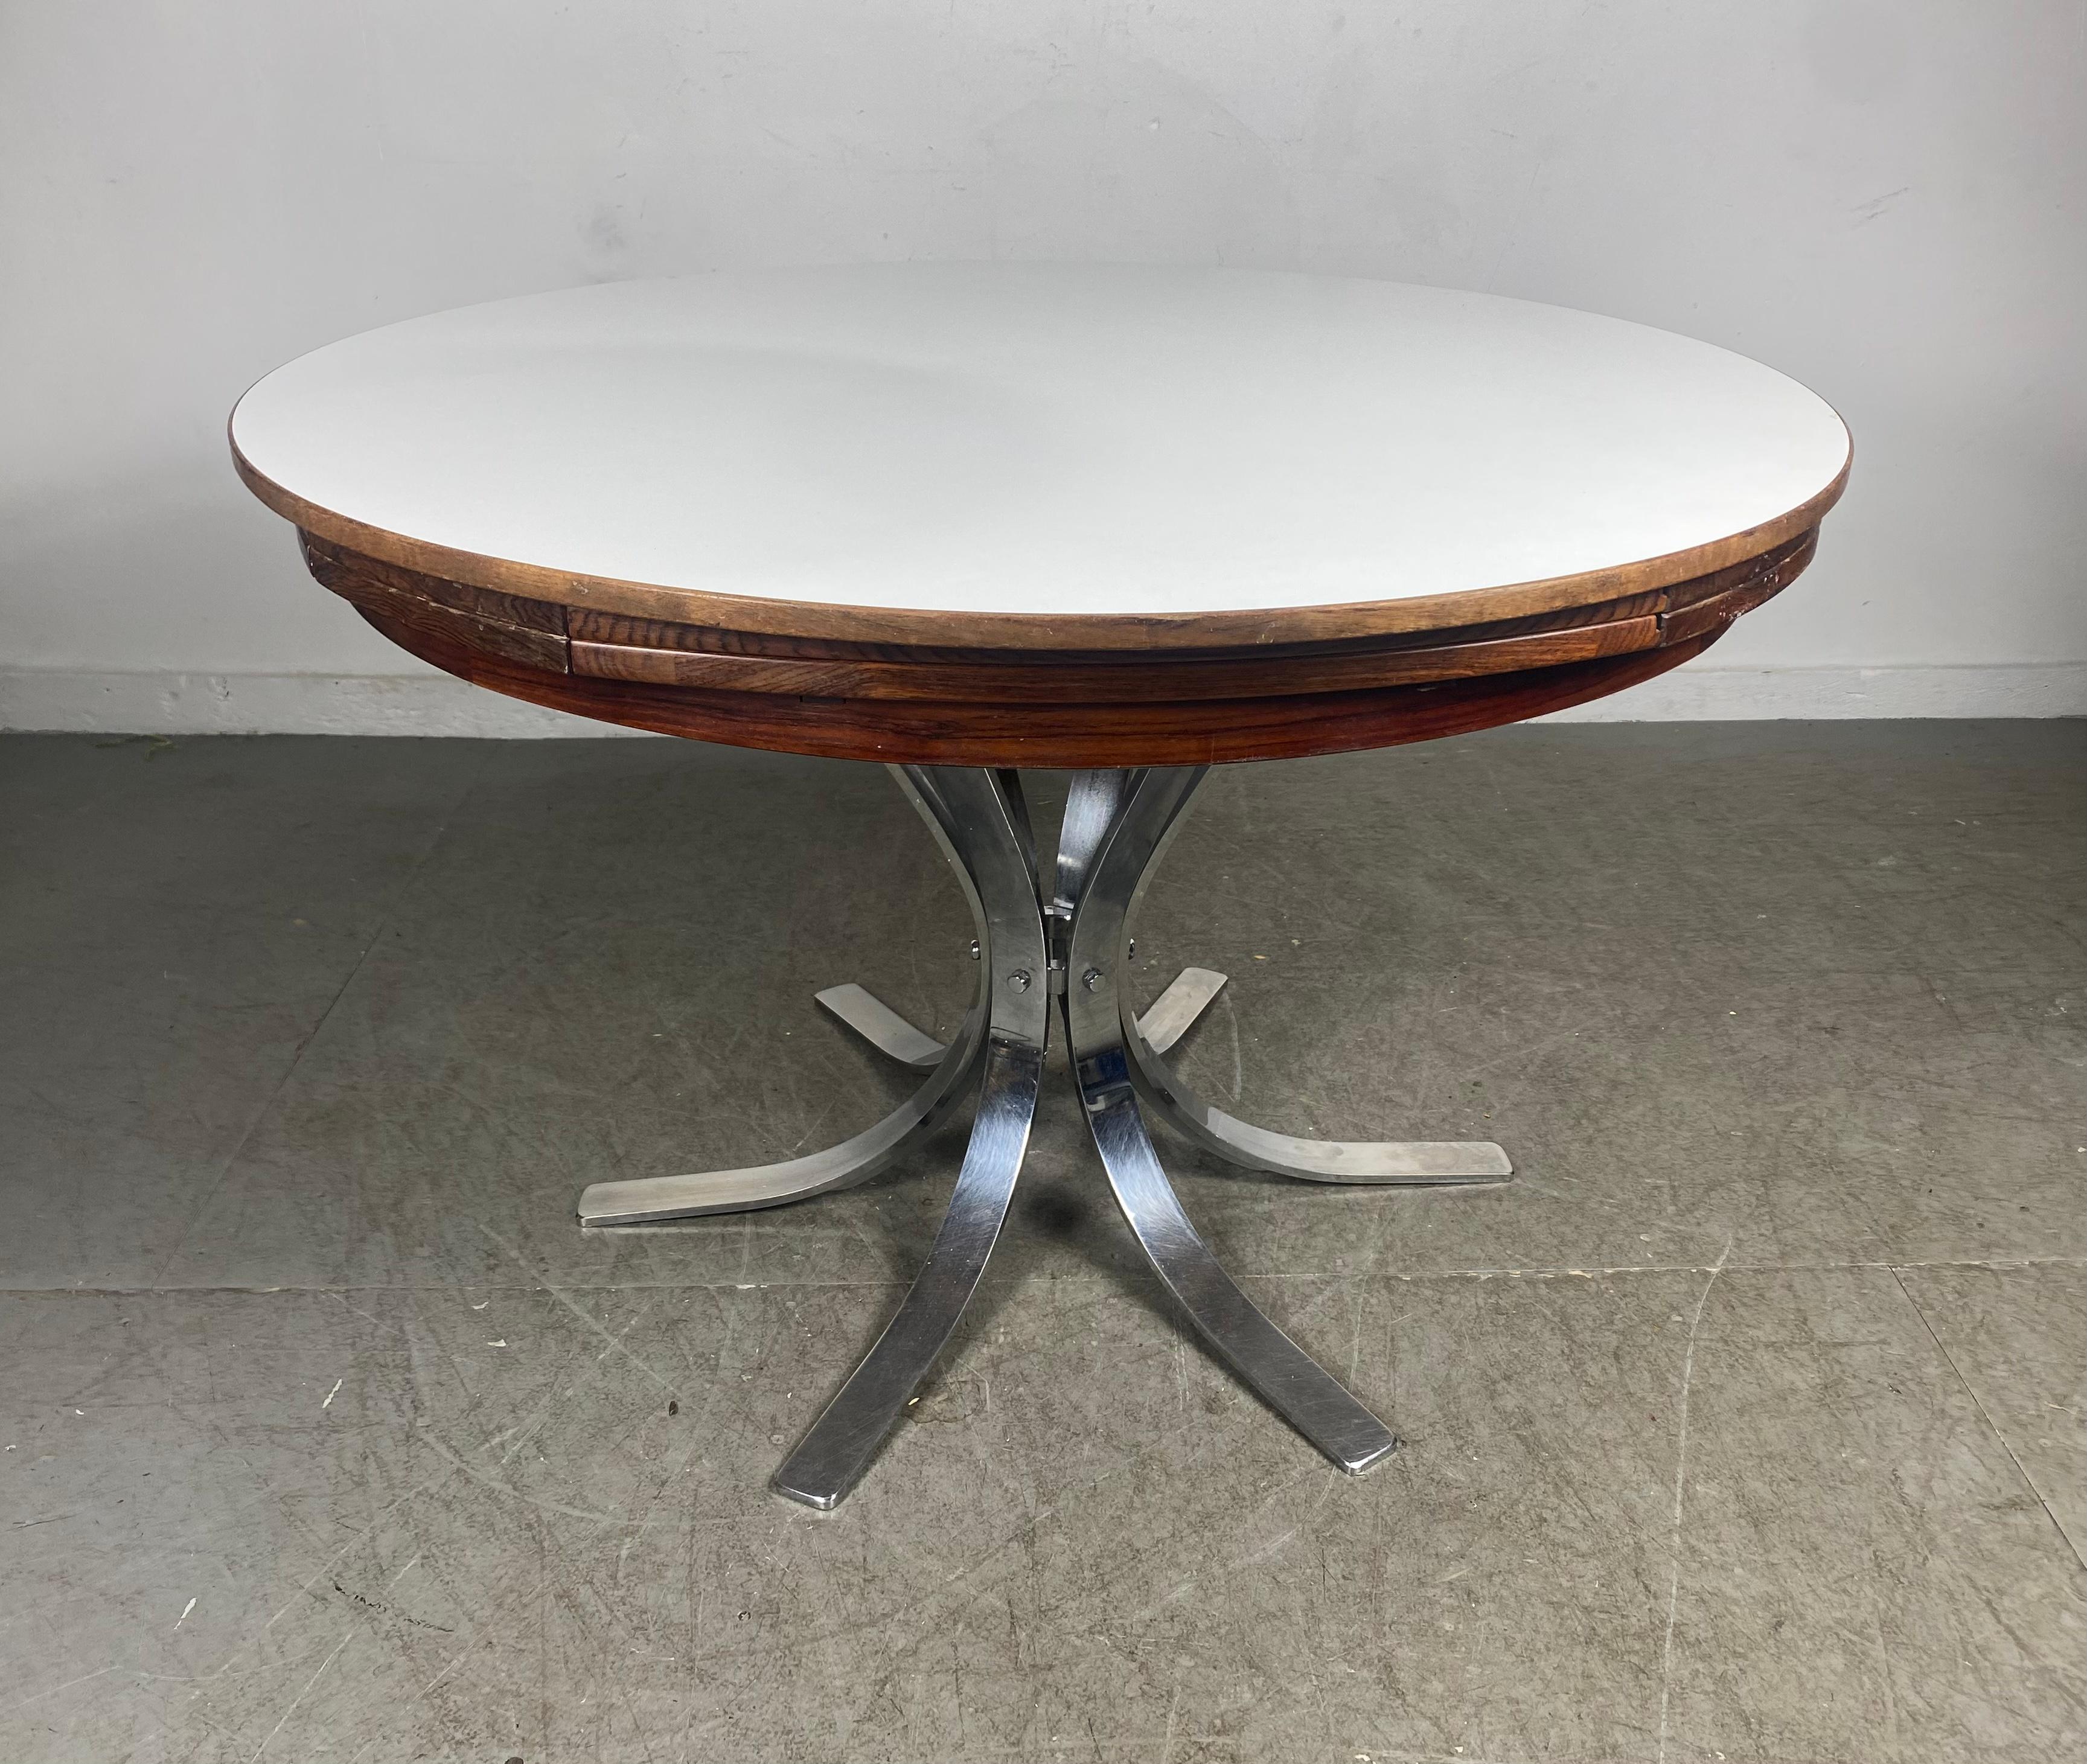 Seldom seen Rosewood and Laminate dining table by Dyrlund circa 1960s Denmark. The table features a round top situated on a six legged chrome pedestal base. This table expands by opening up like a lotus flower. The otter edges of the table fold out